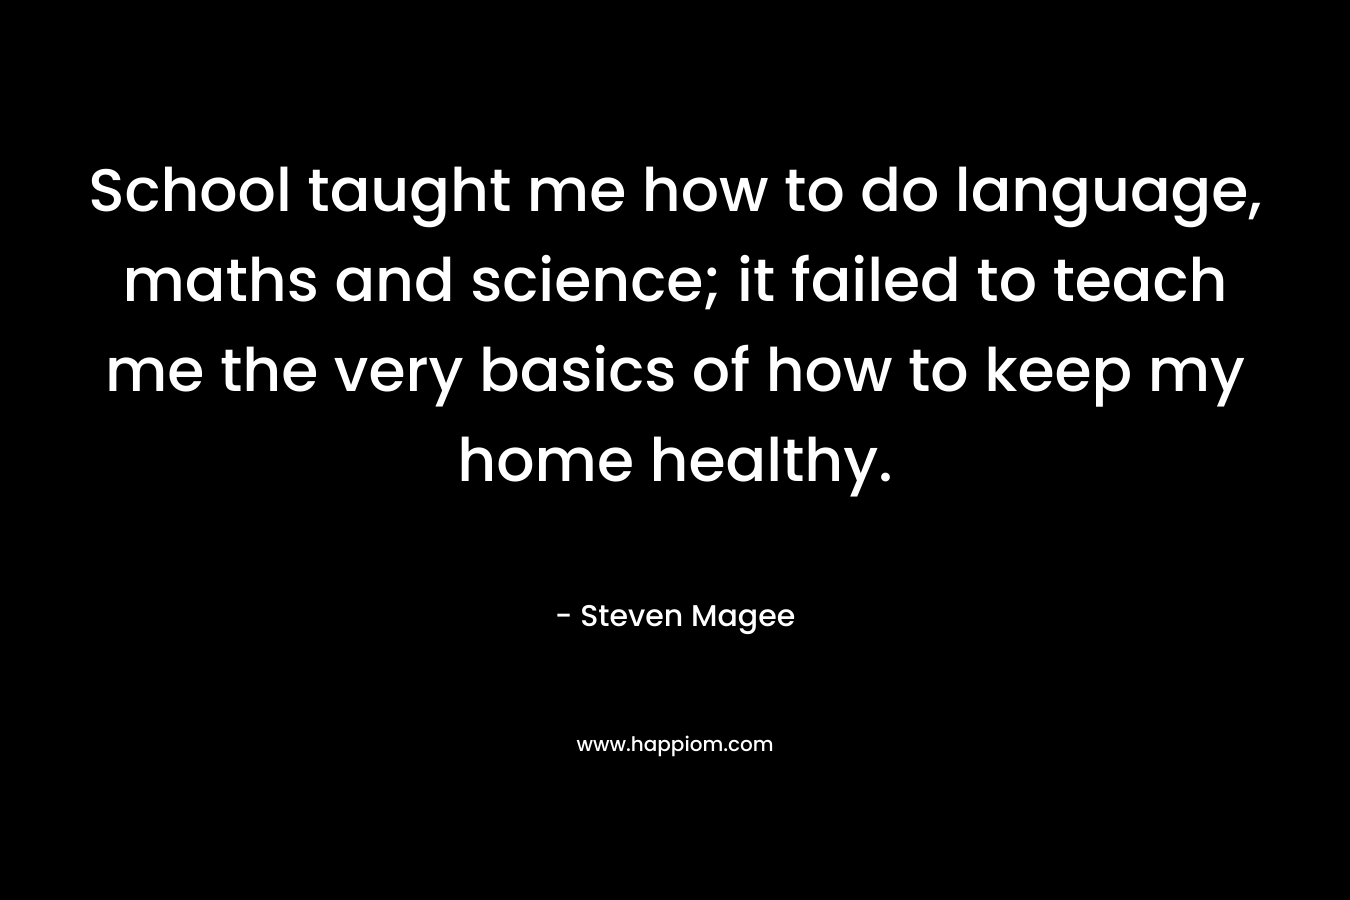 School taught me how to do language, maths and science; it failed to teach me the very basics of how to keep my home healthy. – Steven Magee